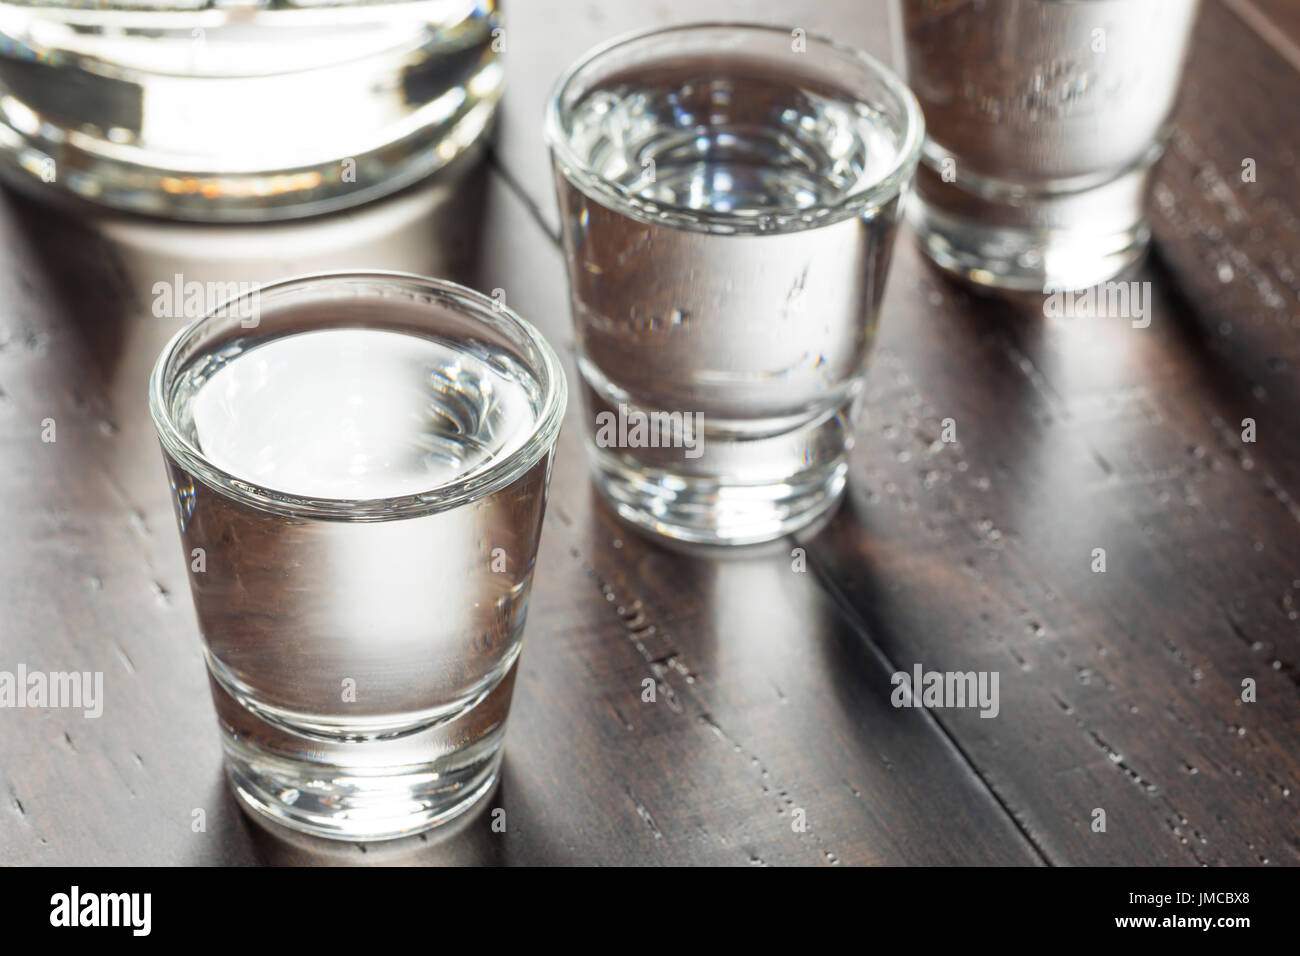 Clear Alcoholic Russian Vodka Shots Ready to Drink Stock Photo